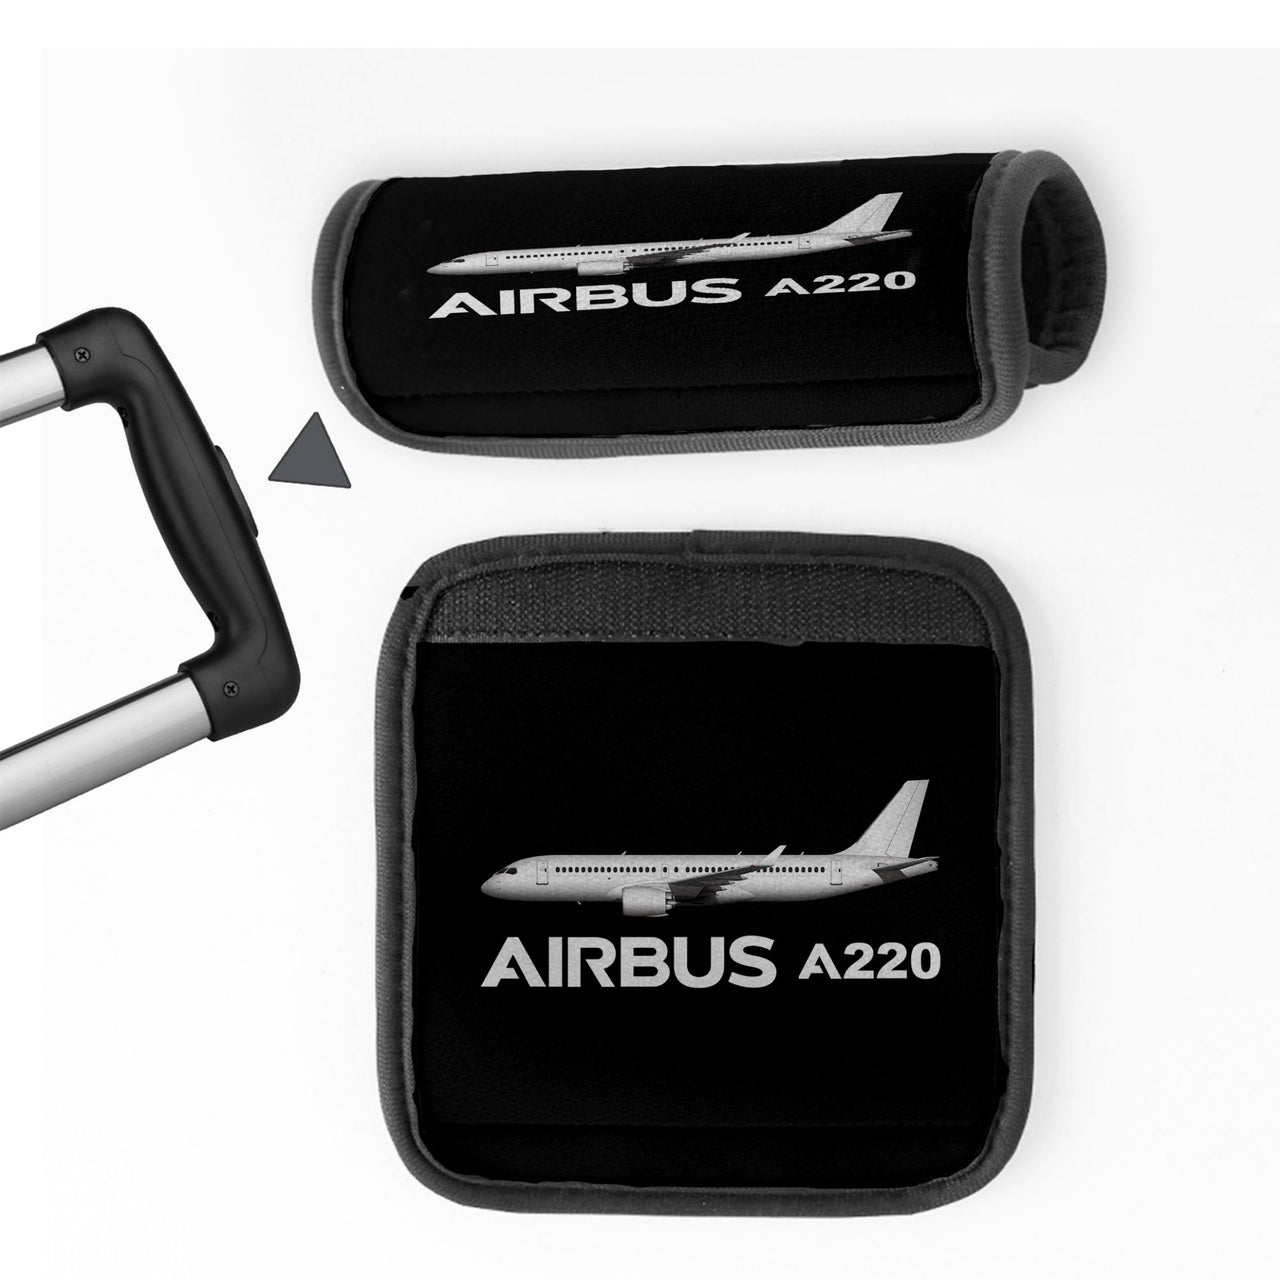 The Airbus A220 Designed Neoprene Luggage Handle Covers